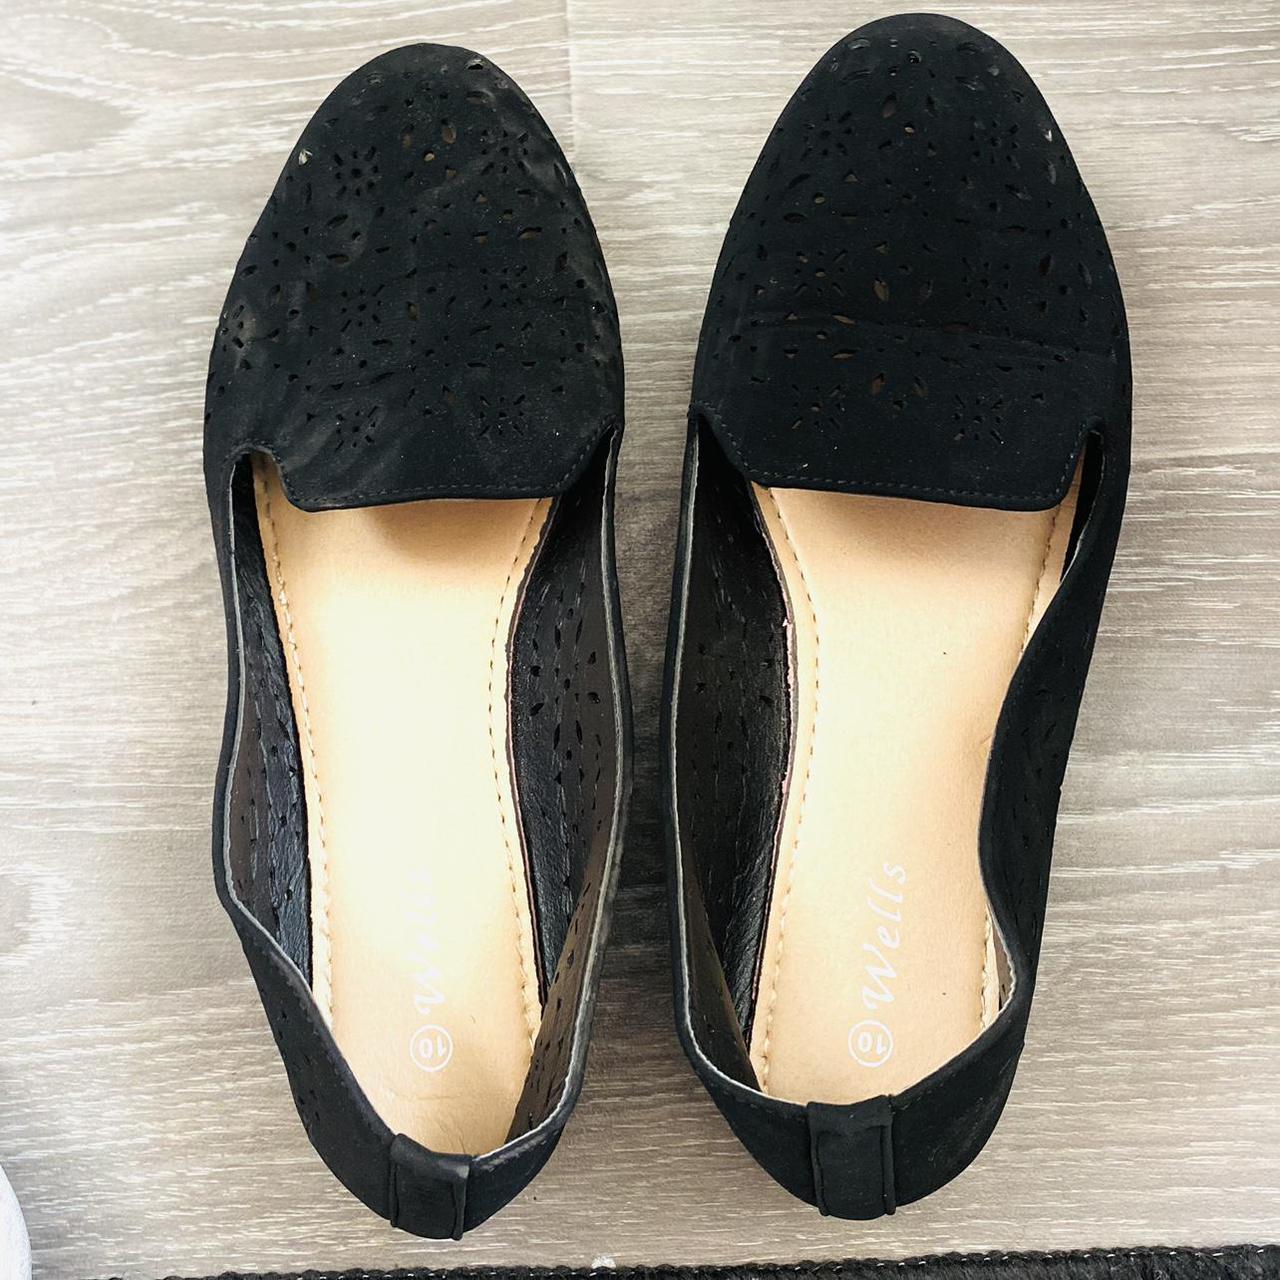 Product Image 2 - Black women’s loafers

- size 10